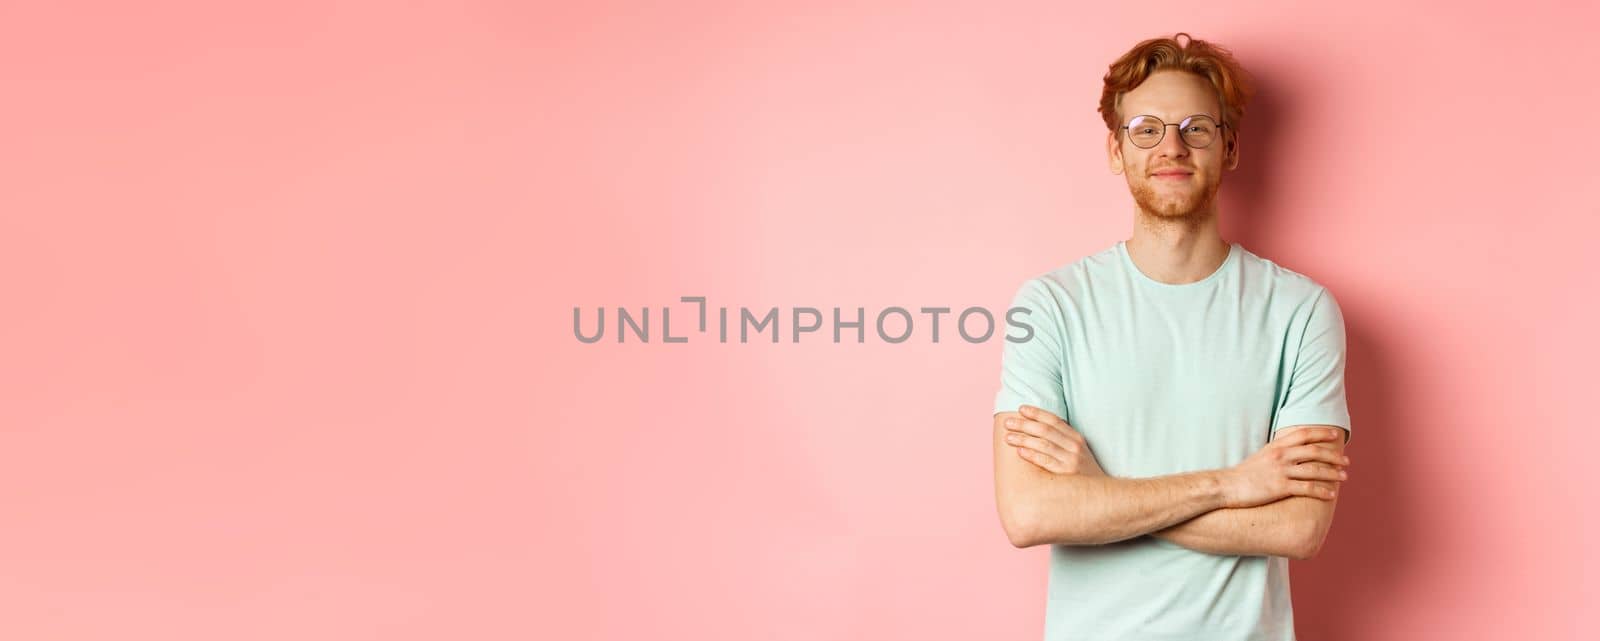 Portrait of satisfied caucasian man with red hair and beard, cross arms on chest and smiling with smug face, wearing glasses, standing over pink background.